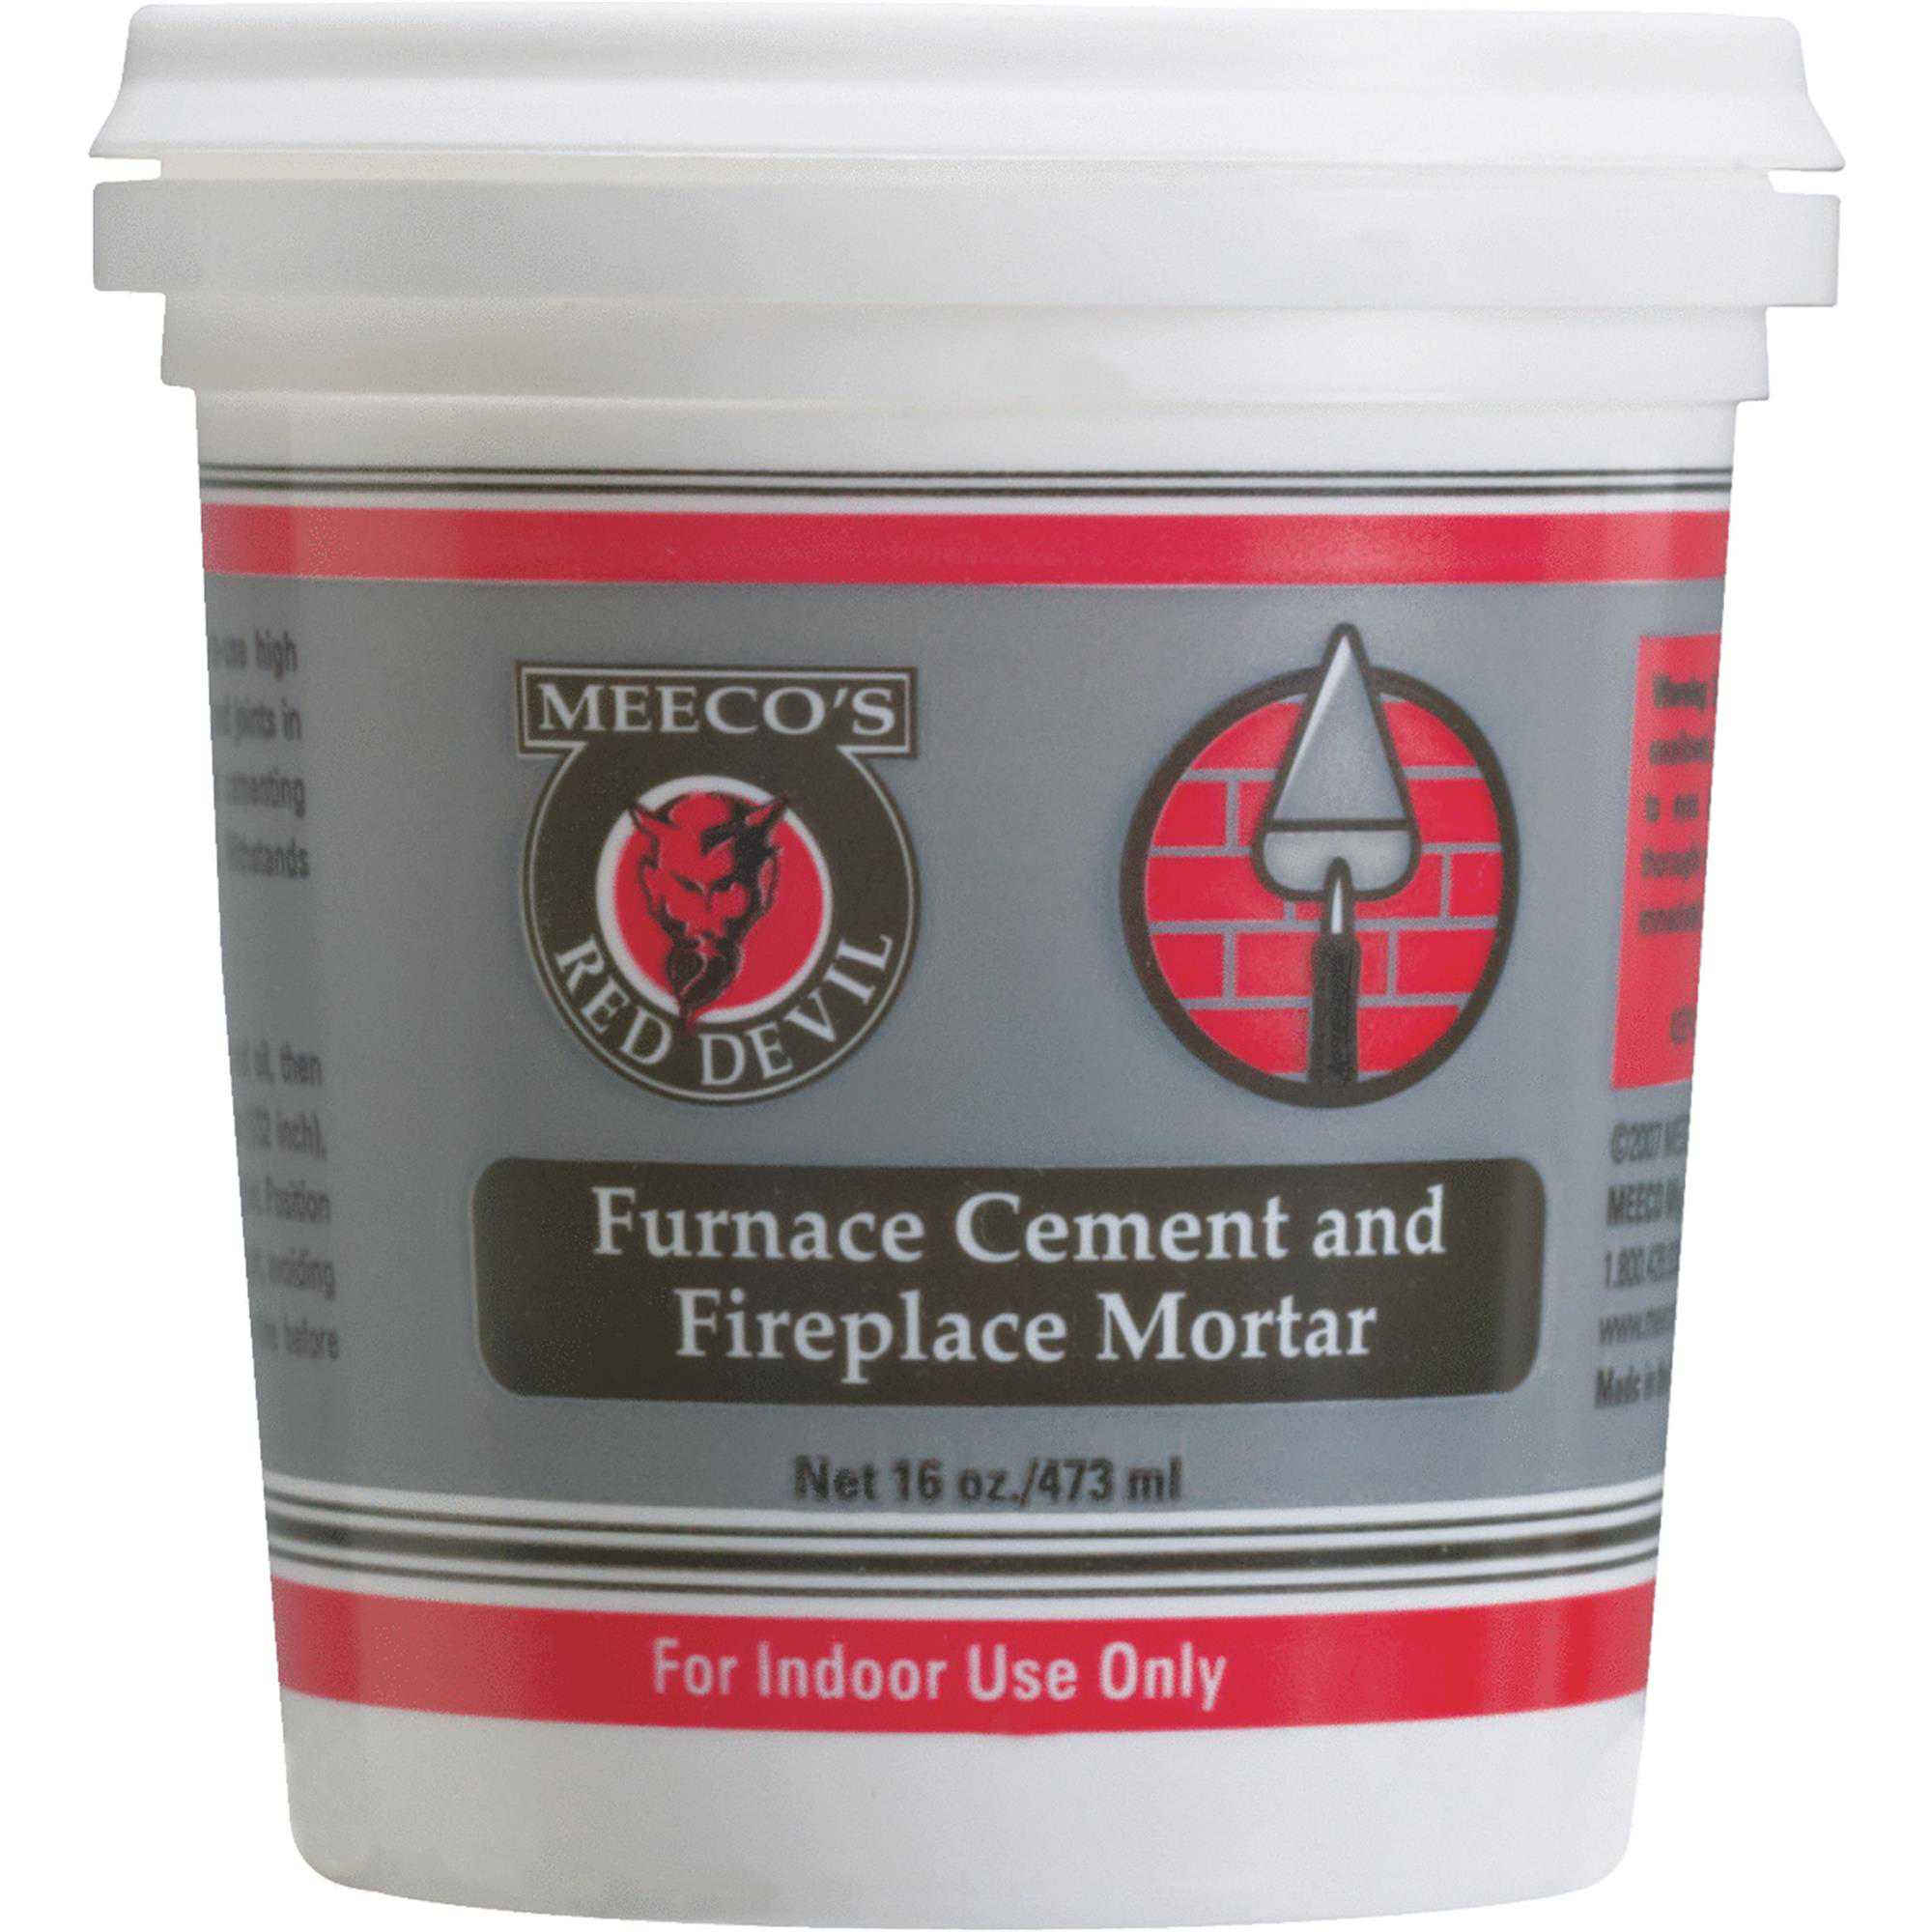 Meeco's Red Devil Furnace Cement & Fireplace Mortar